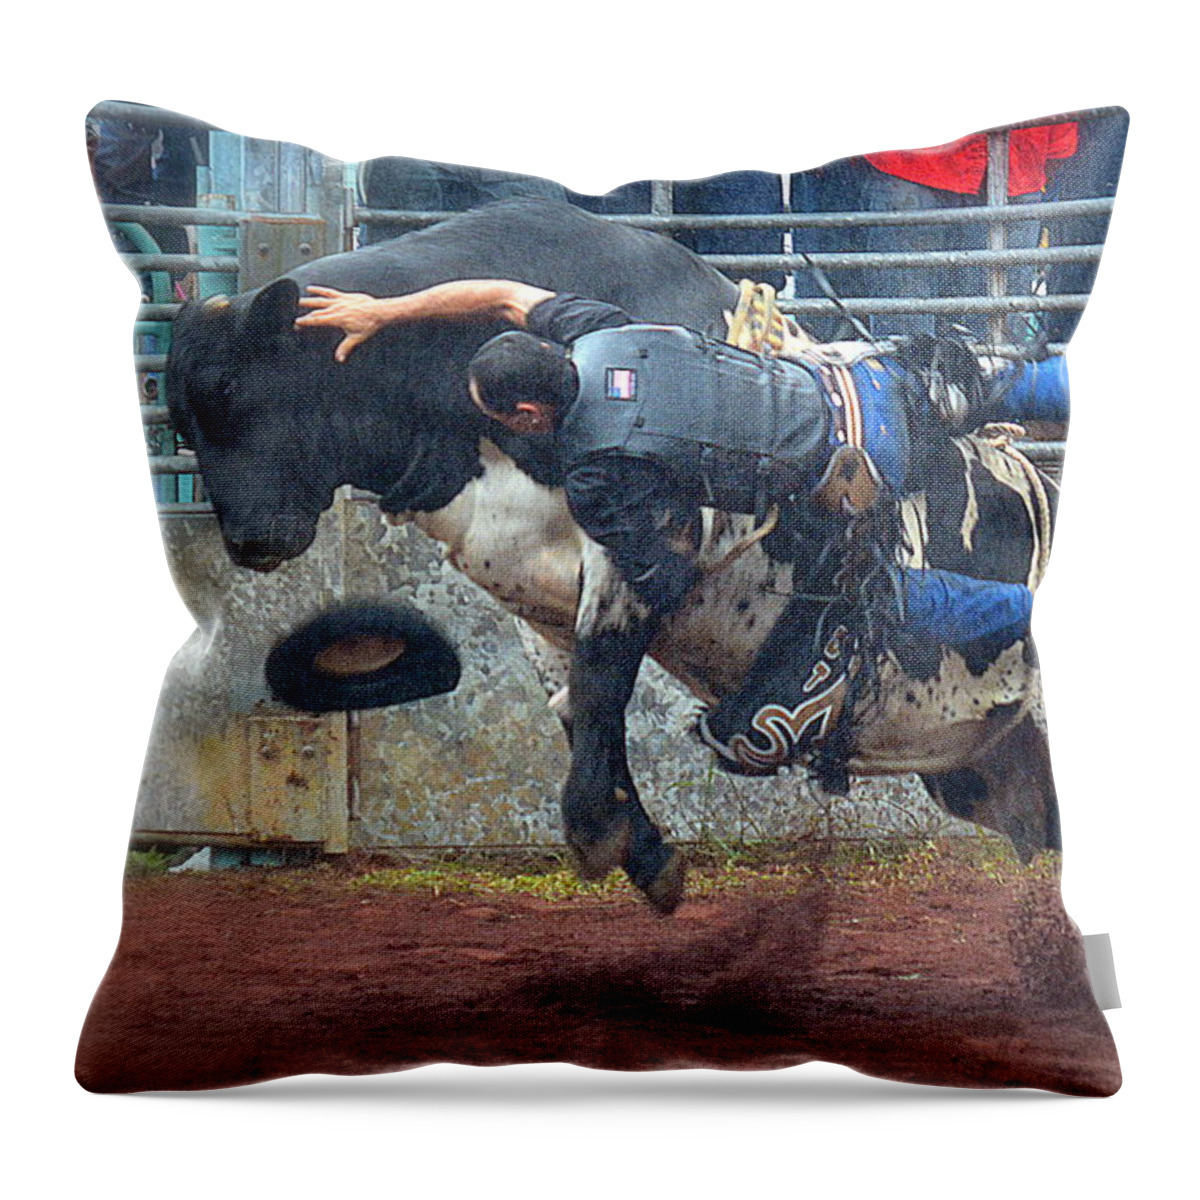 Rodeo Throw Pillow featuring the photograph Taking the Fall by Lori Seaman